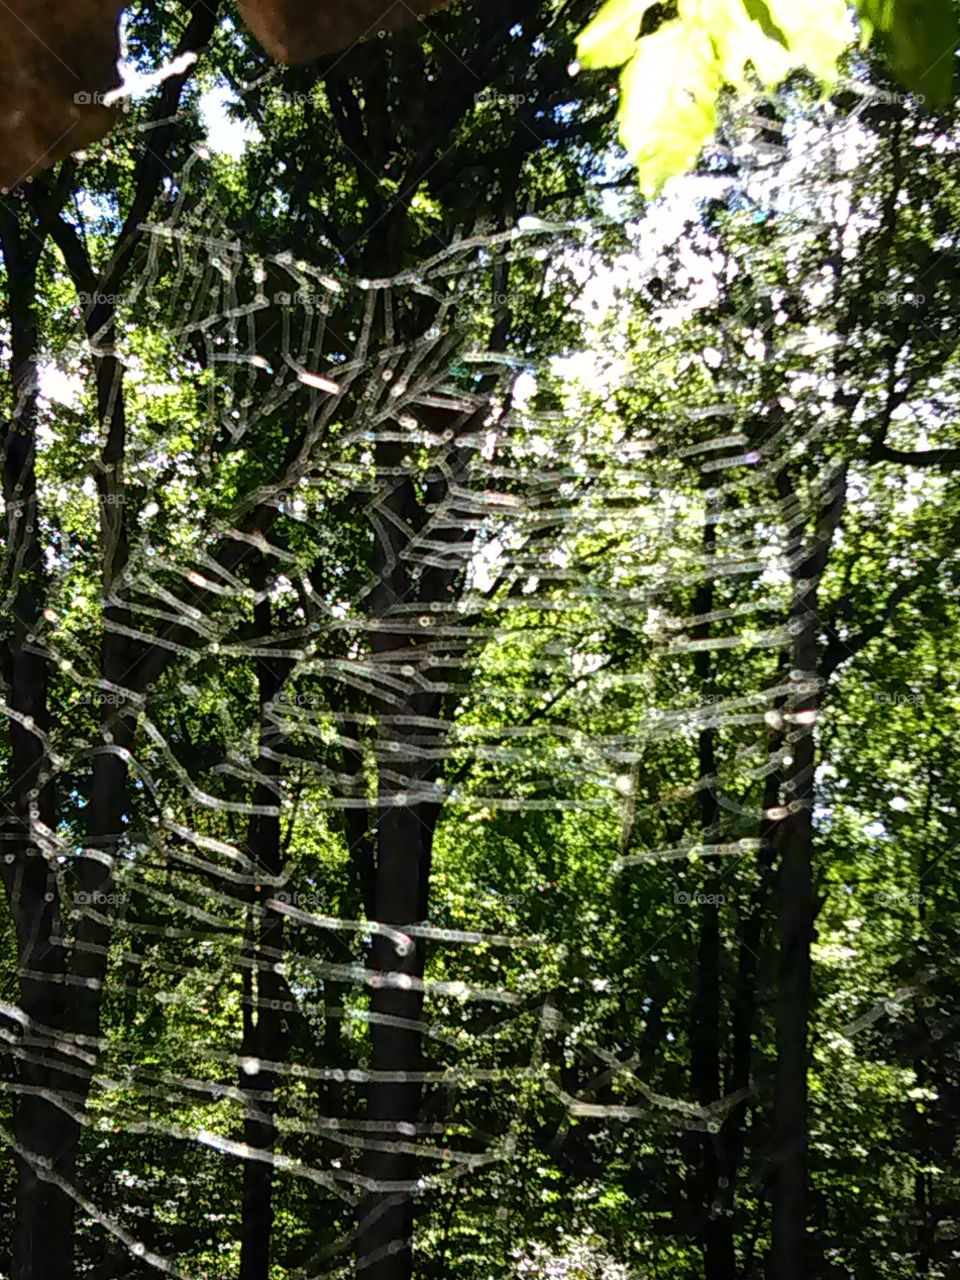 a unique view of a spiders web